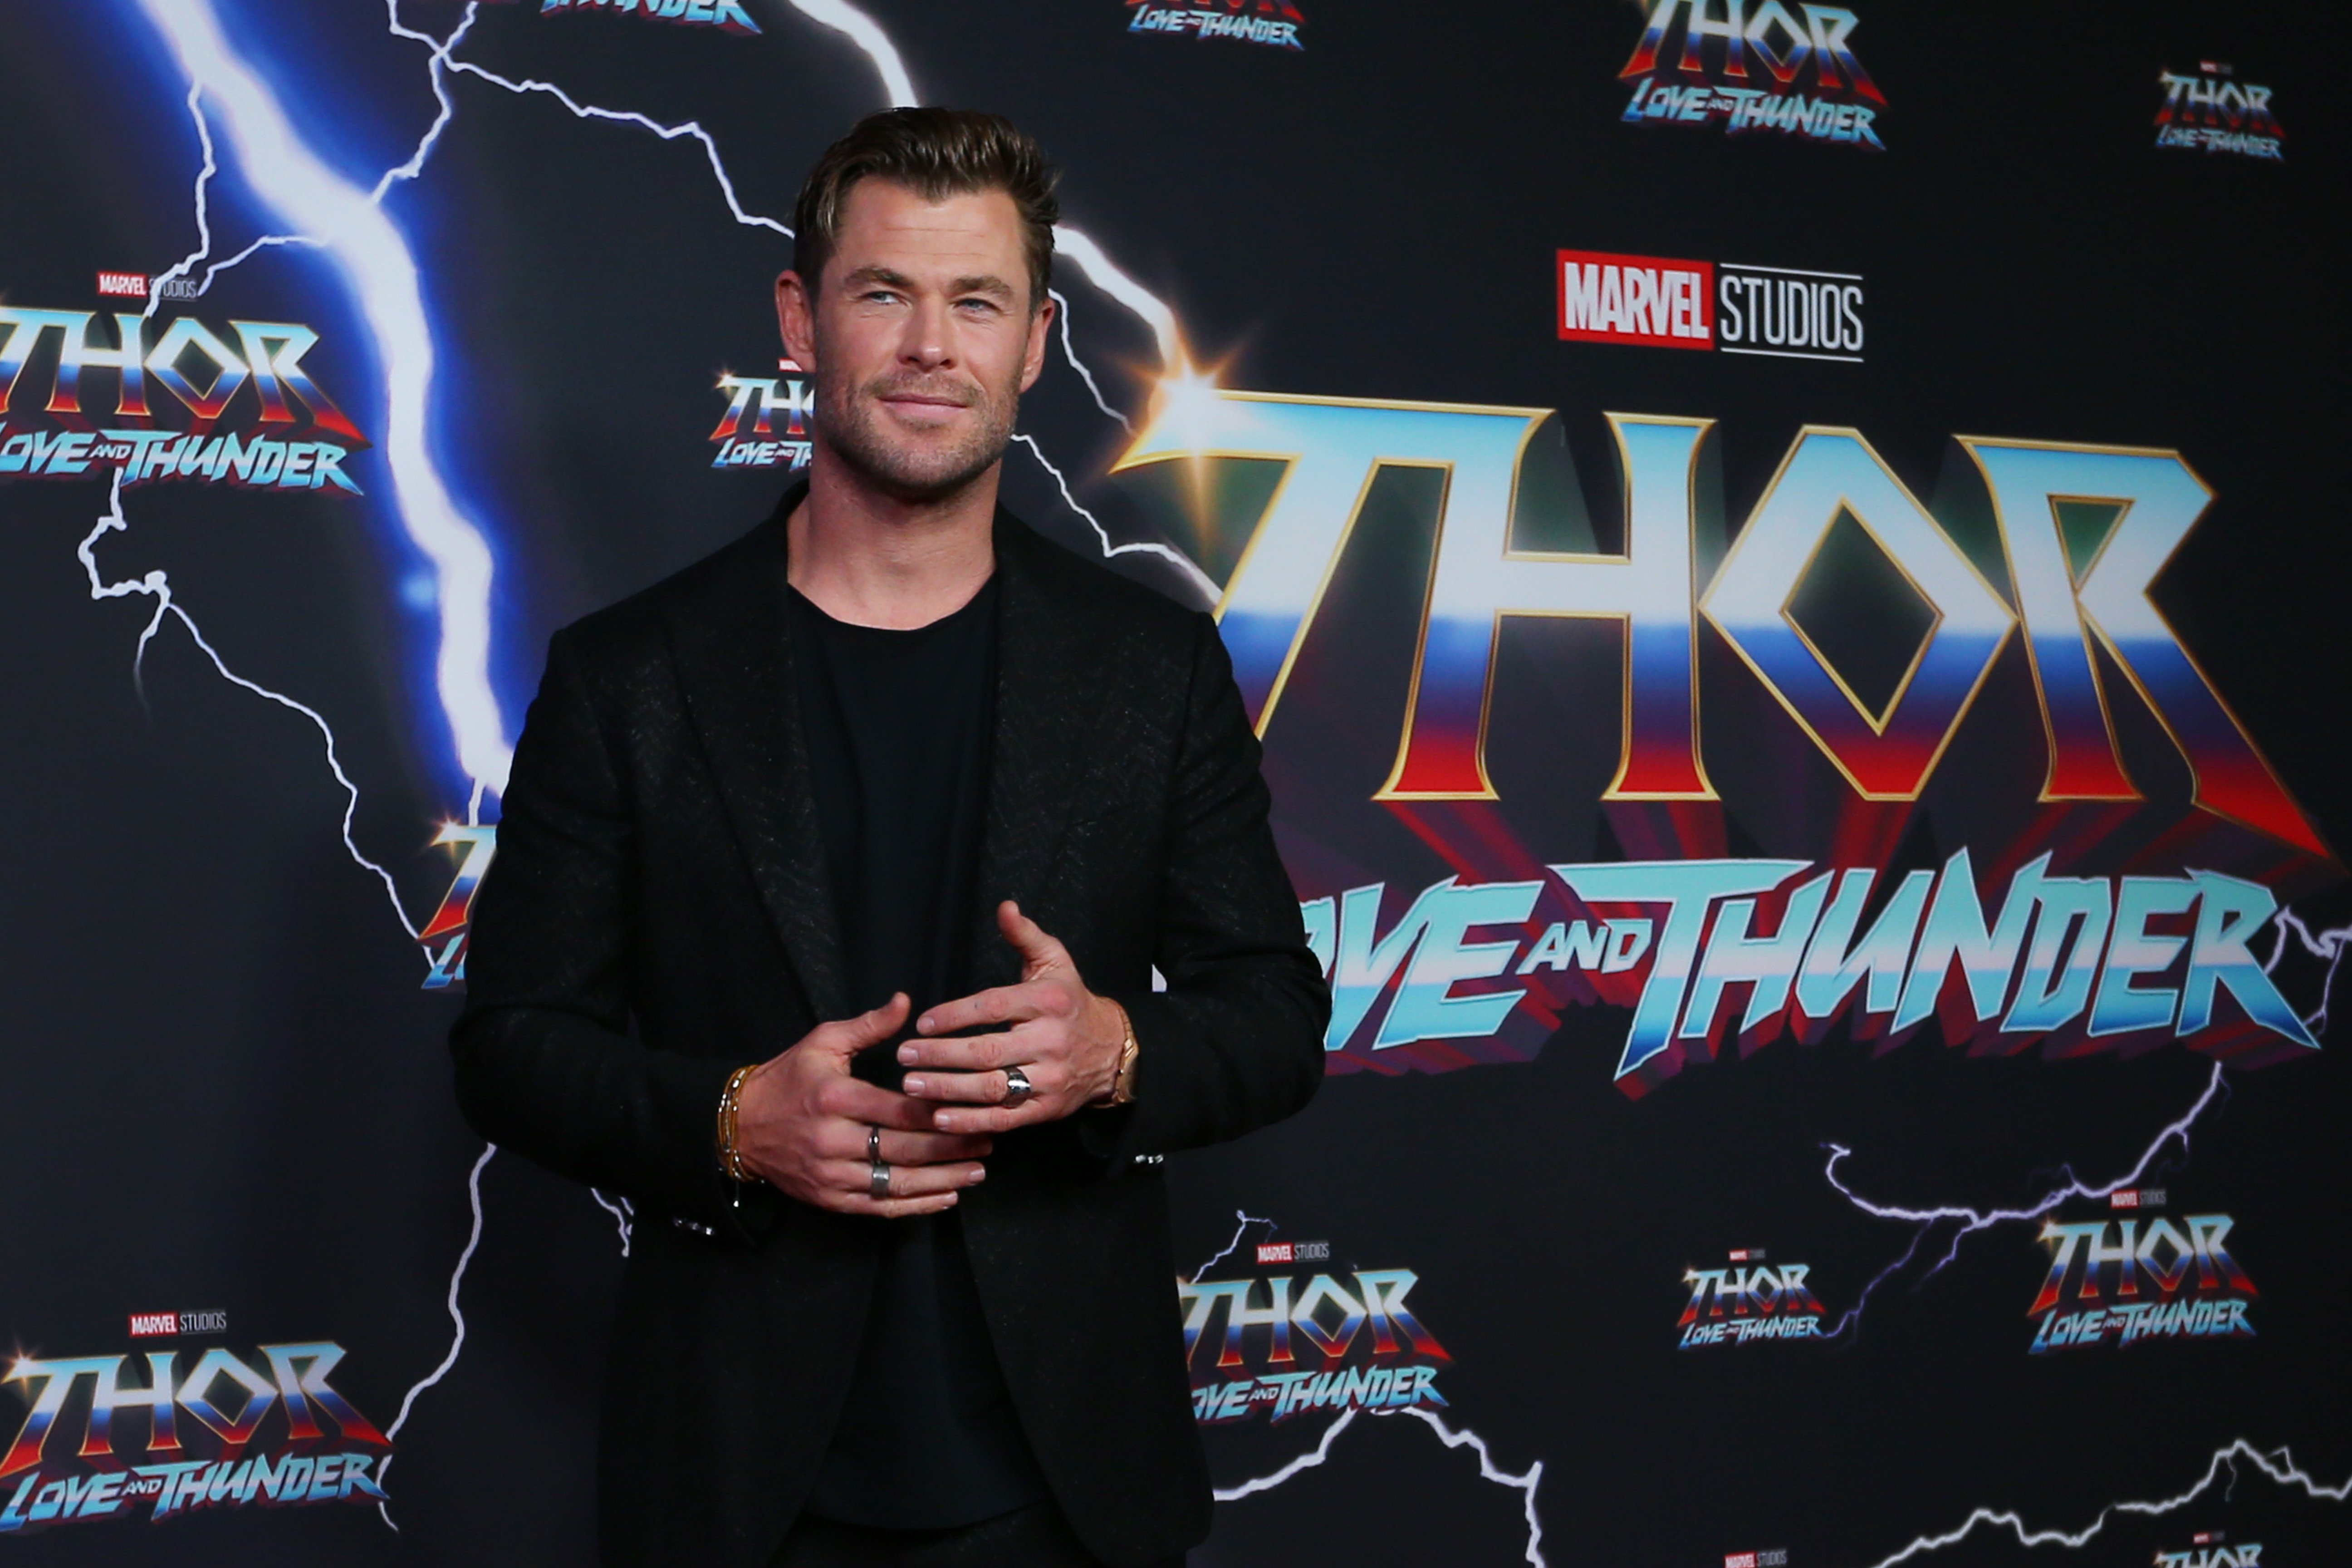 Chris Hemsworth, who stars in 'Thor: Love and Thunder,' which isn't getting great reviews on Rotten Tomatoes, wears a black suit over a black shirt.